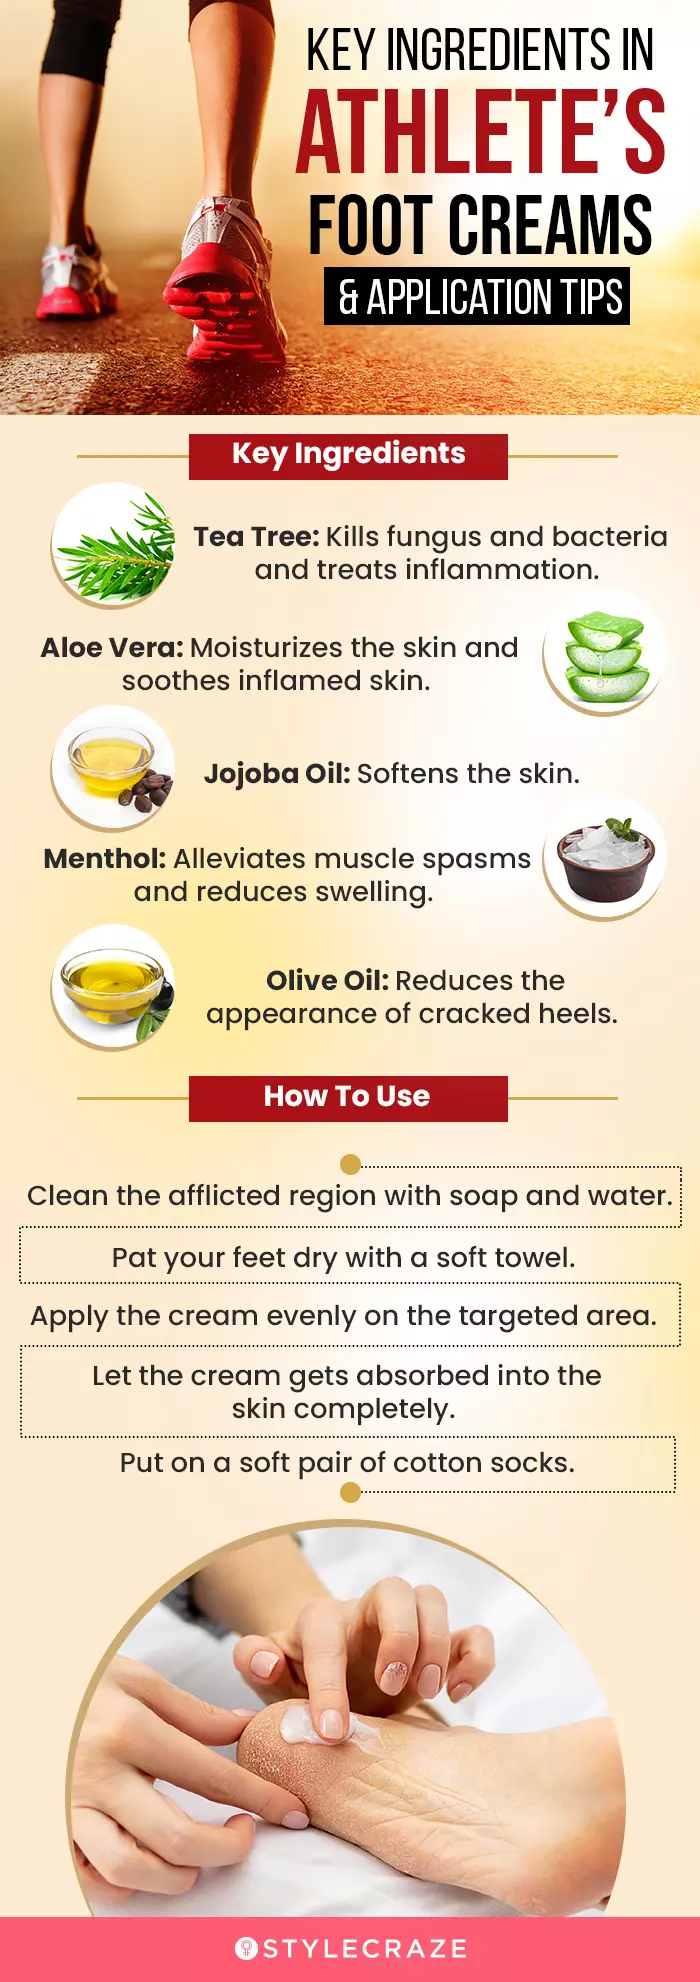 Key Ingredients In Athlete’s Foot Creams & Application Tips (infographic)